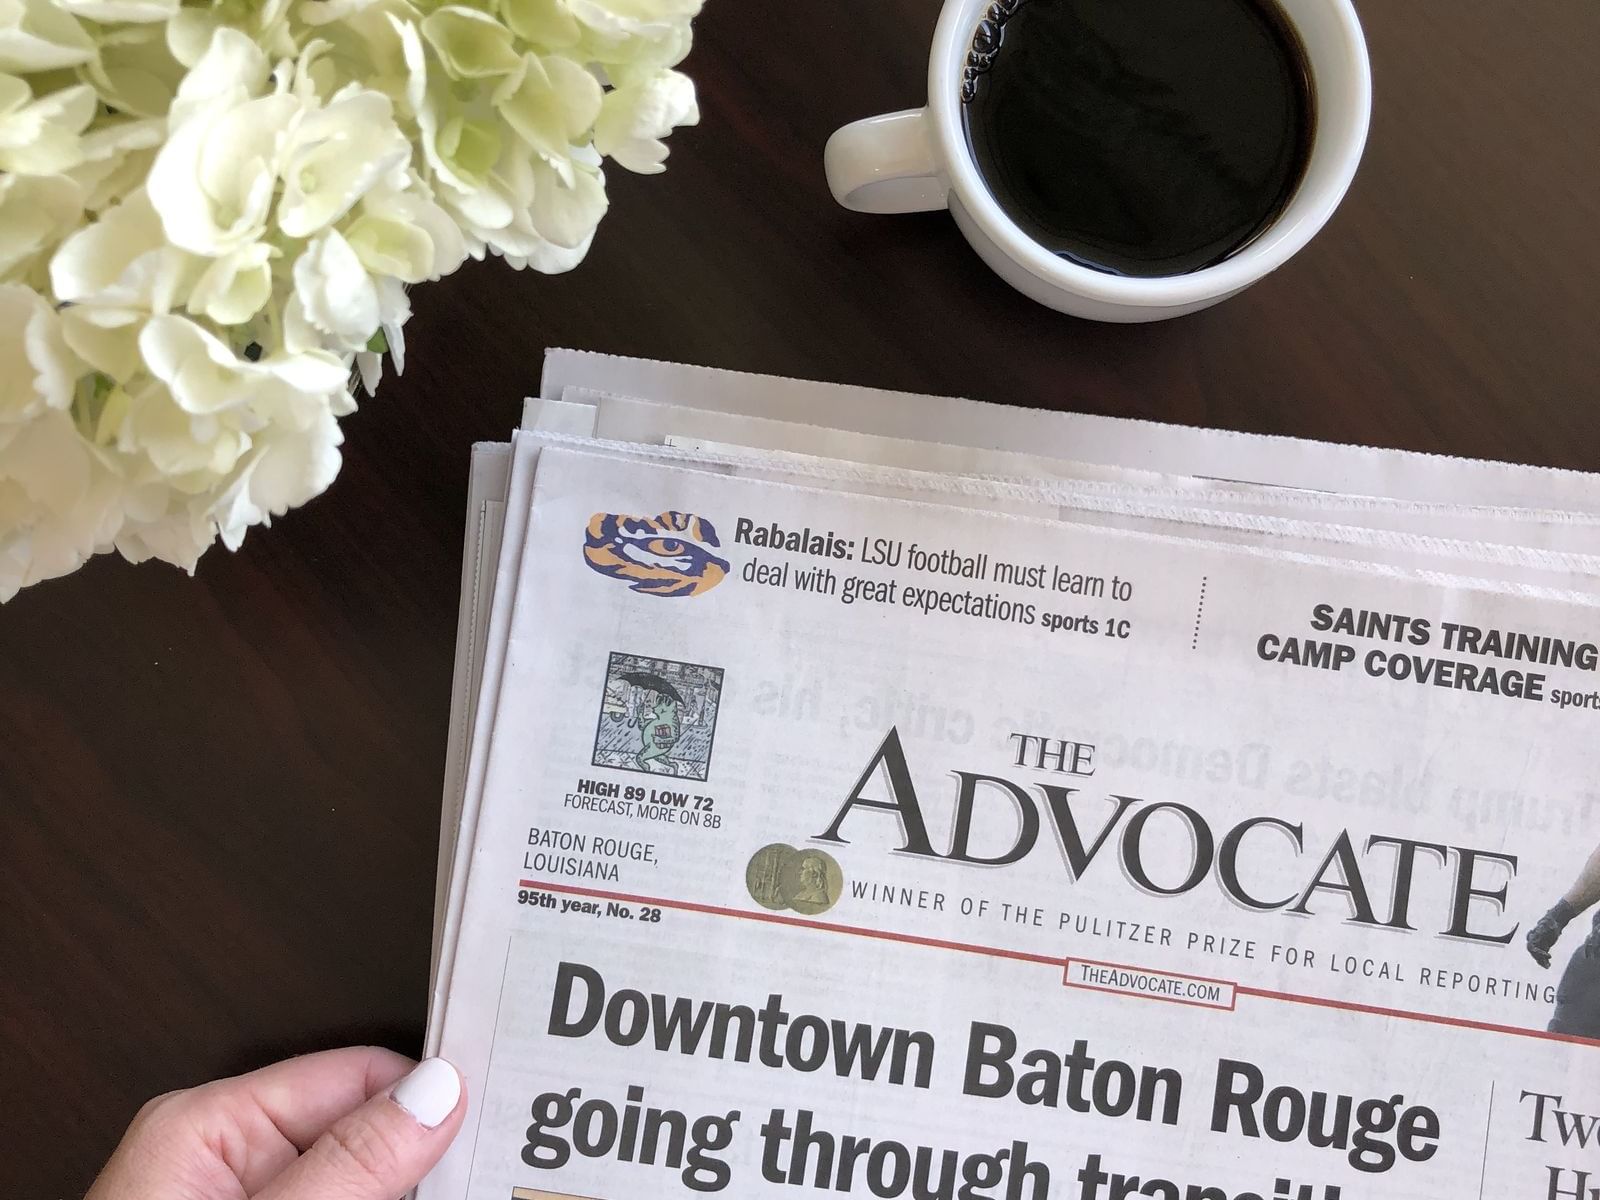 The Advocate newspaper and cup of coffee